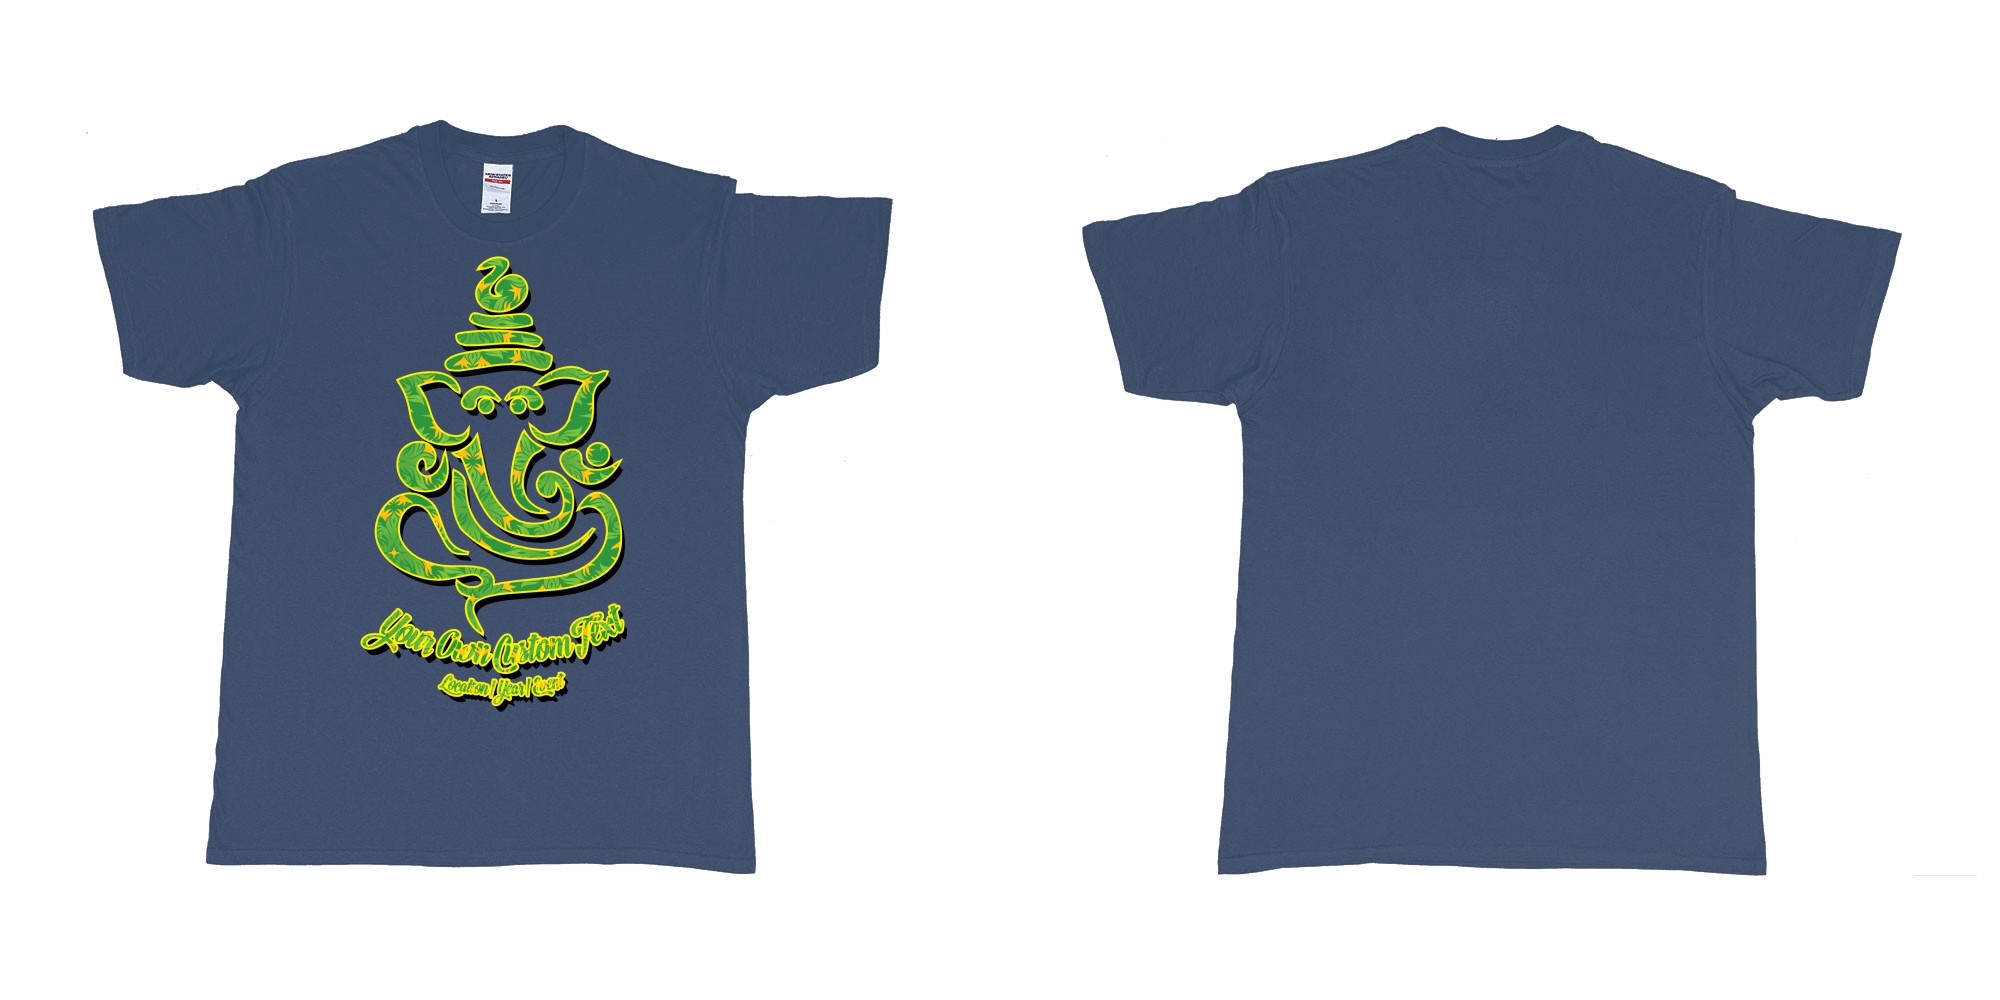 Custom tshirt design ganesh soft jungle yoga customize own design in fabric color navy choice your own text made in Bali by The Pirate Way